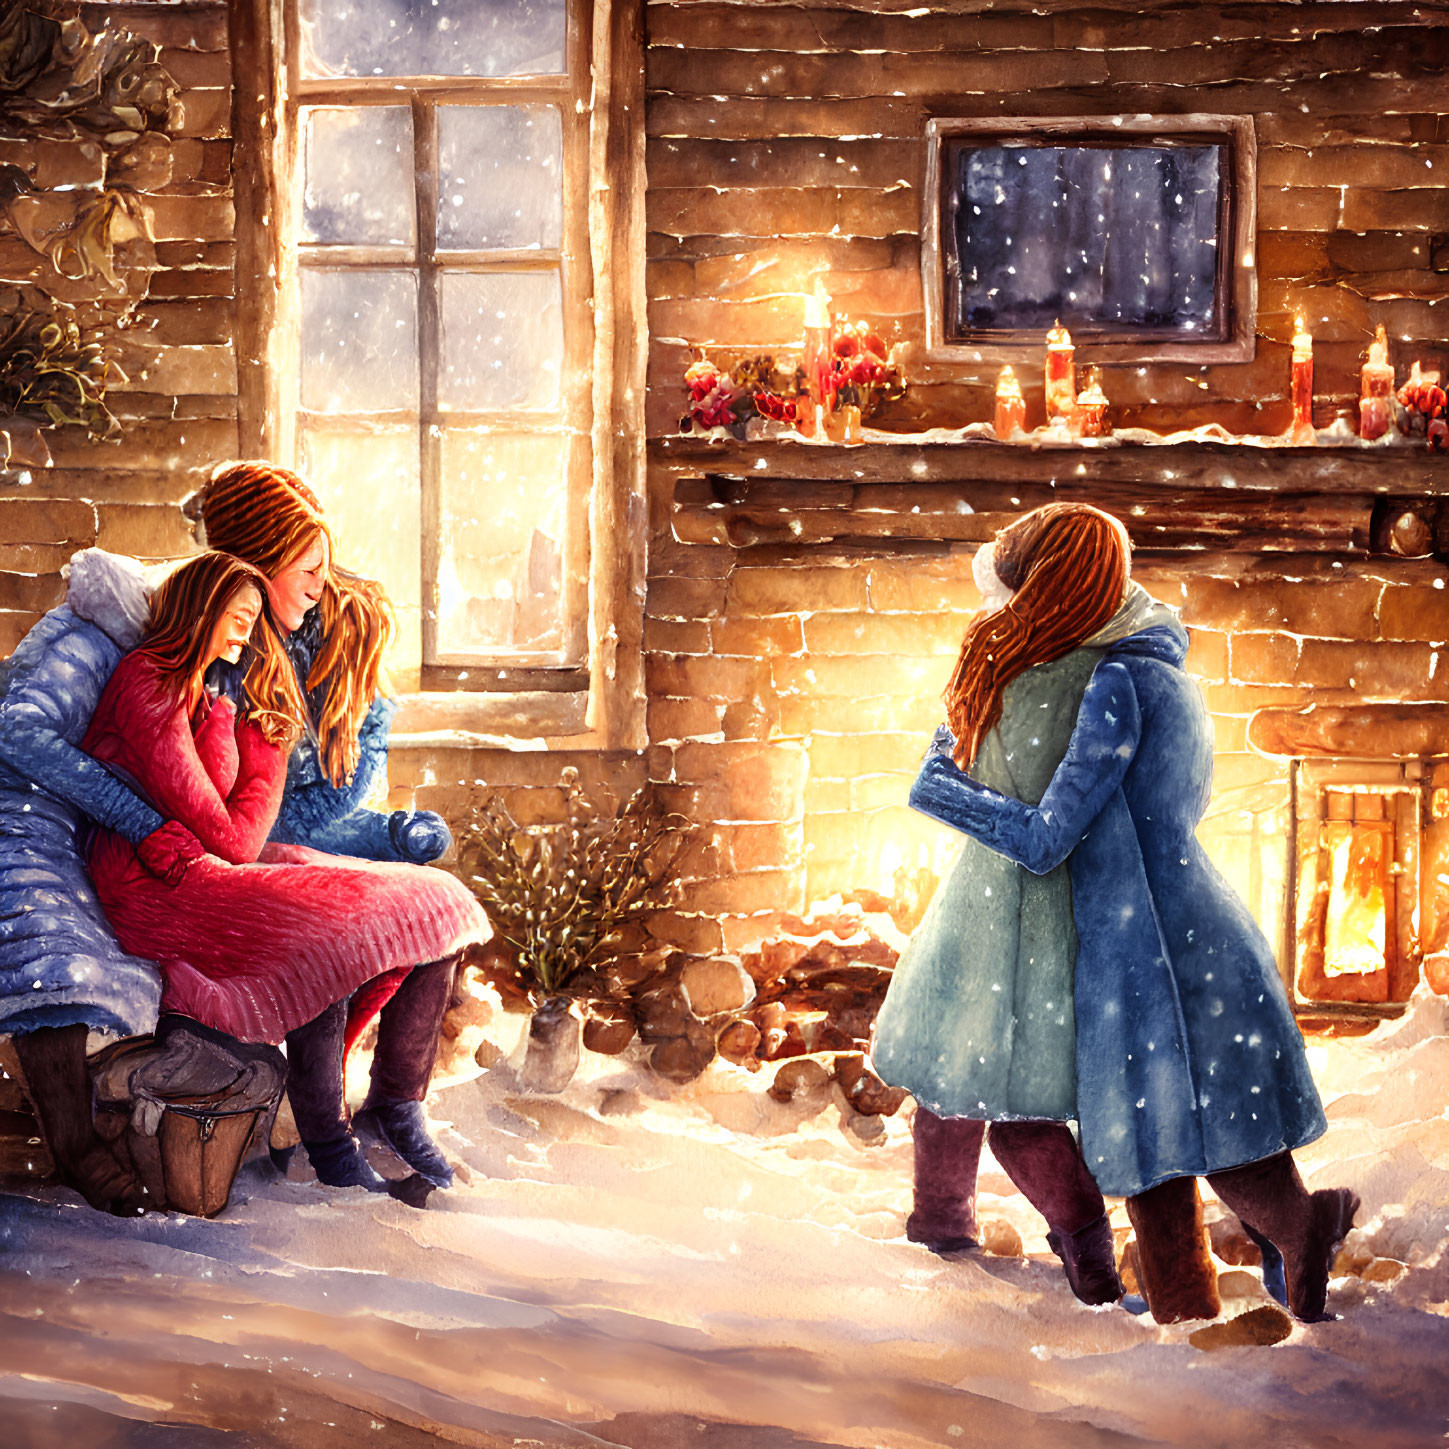 Three People in Winter Clothing Outside Snowy Wooden House